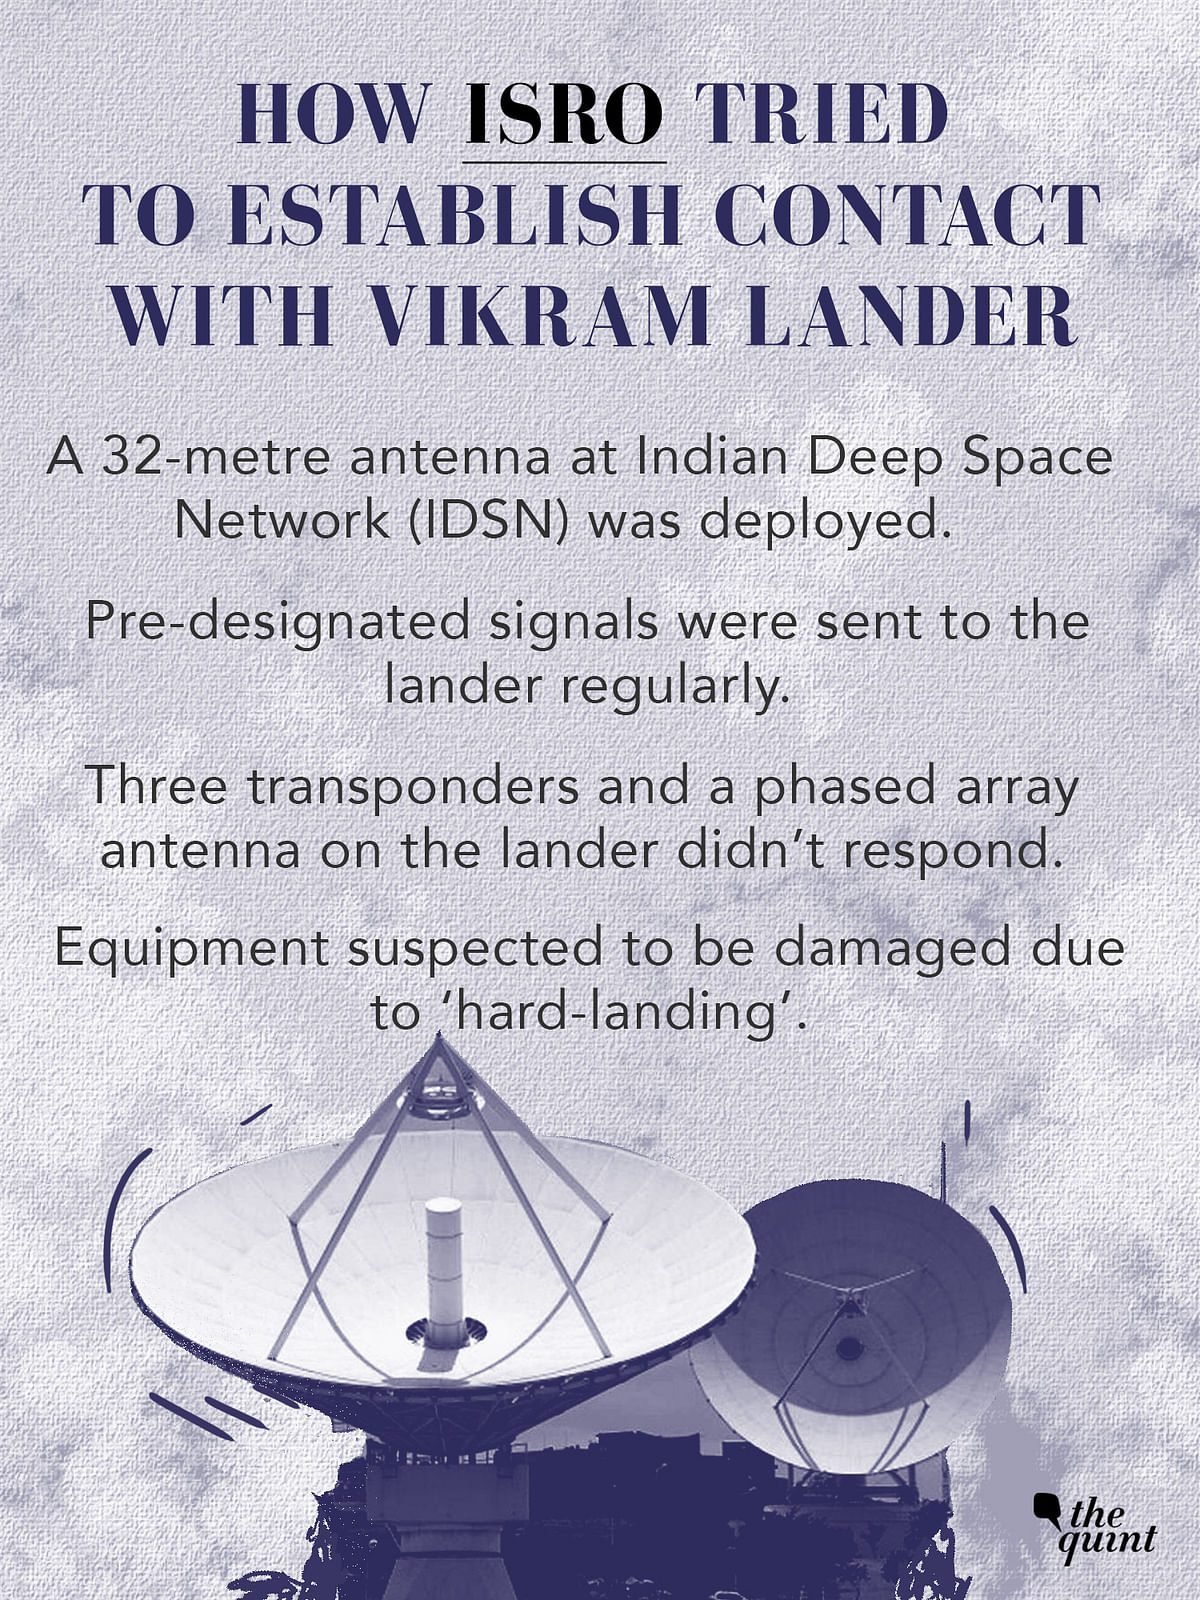 At the heart of ISRO’s attempts to re-establish contact with Vikram lander was the Indian Deep Space Network.